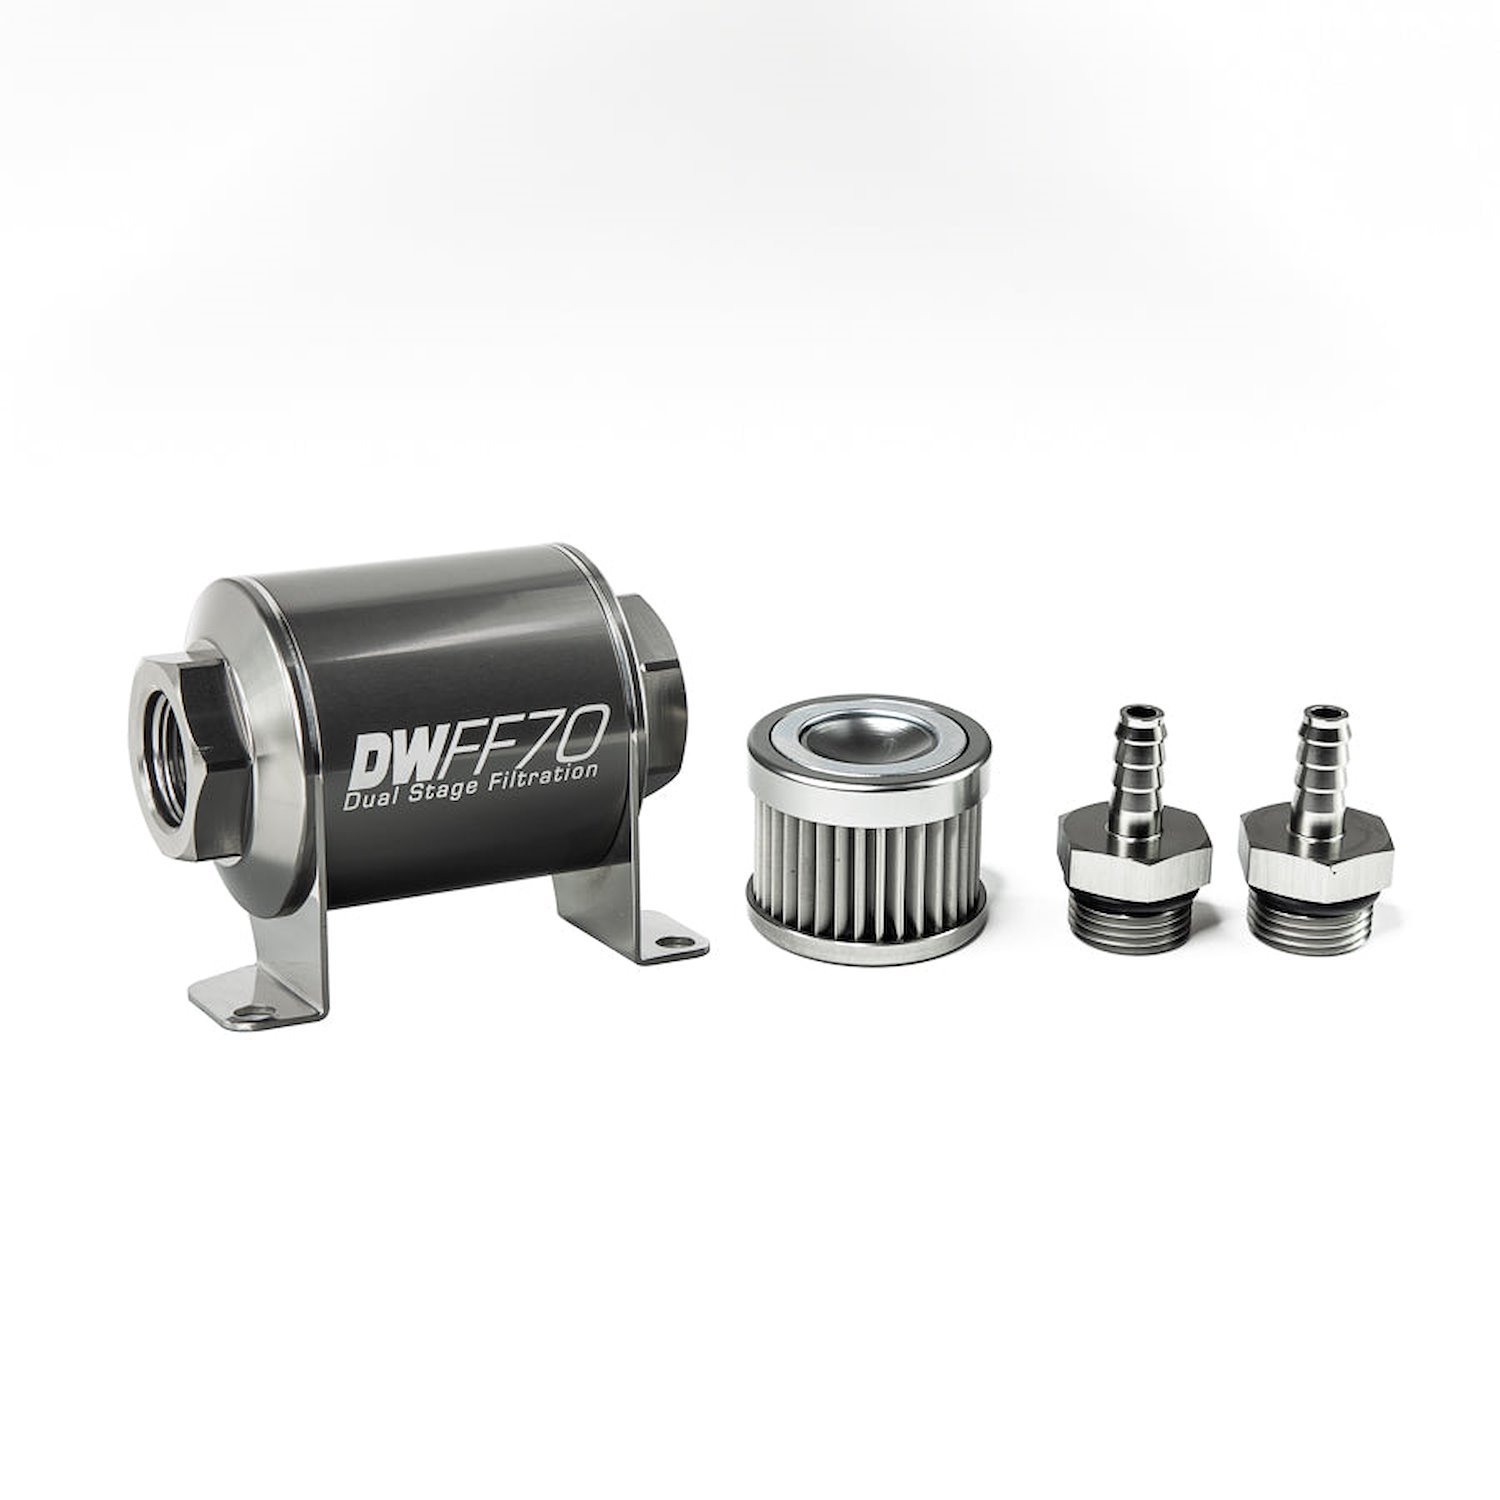 803070010K51 In-line fuel filter element and housing kit stainless steel 10 micron 5/16in hose barb 70mm. Universal